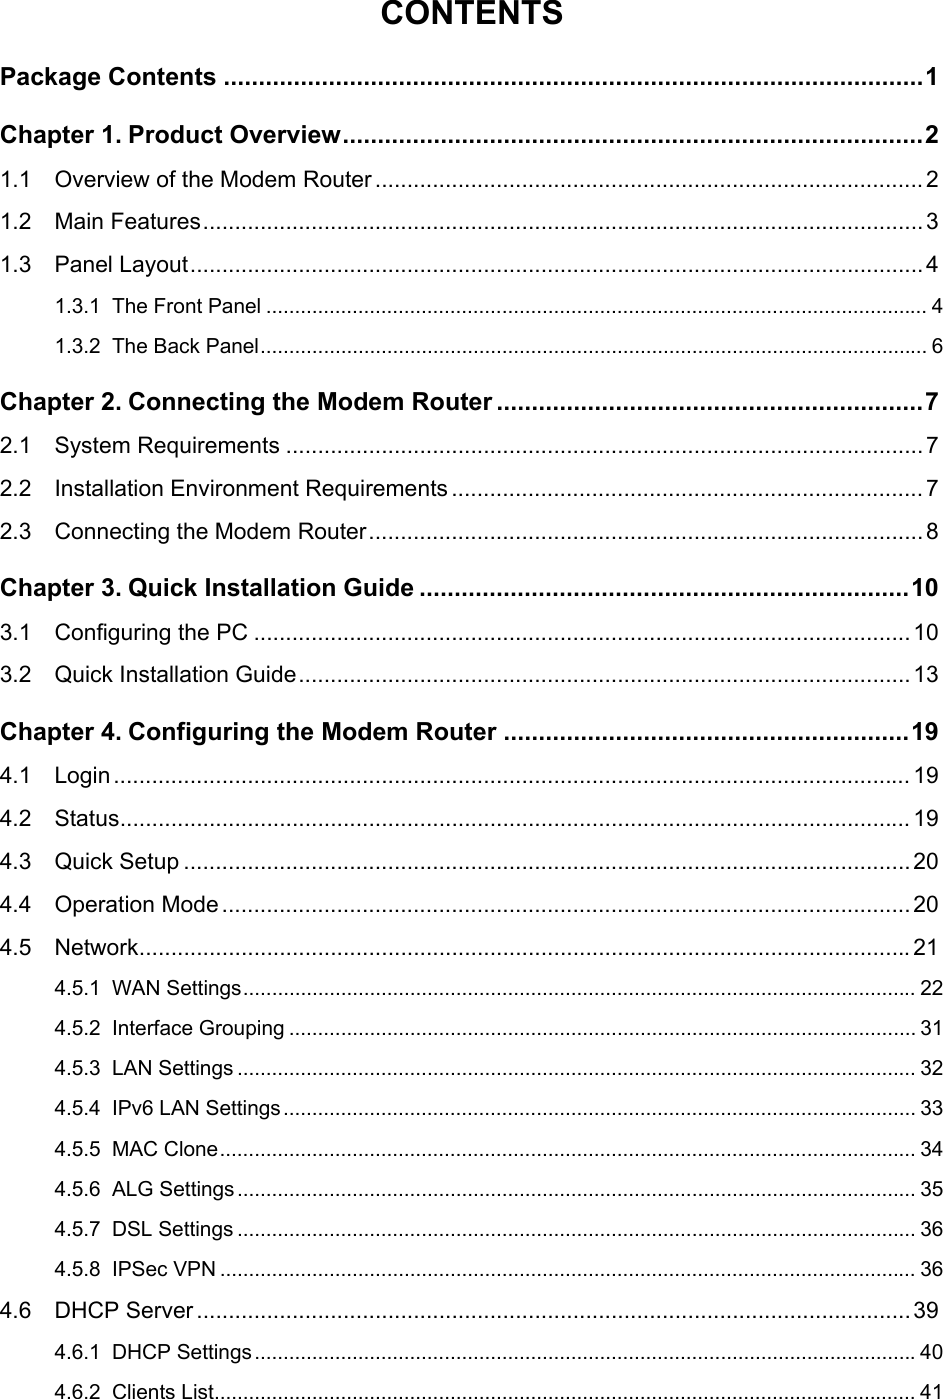   CONTENTS Package Contents ....................................................................................................1 Chapter 1. Product Overview...................................................................................2 1.1 Overview of the Modem Router ......................................................................................2 1.2 Main Features.................................................................................................................3 1.3 Panel Layout...................................................................................................................4 1.3.1 The Front Panel ................................................................................................................... 4 1.3.2 The Back Panel.................................................................................................................... 6 Chapter 2. Connecting the Modem Router .............................................................7 2.1 System Requirements ....................................................................................................7 2.2 Installation Environment Requirements .......................................................................... 7 2.3 Connecting the Modem Router.......................................................................................8 Chapter 3. Quick Installation Guide ......................................................................10 3.1 Configuring the PC ....................................................................................................... 10 3.2 Quick Installation Guide................................................................................................13 Chapter 4. Configuring the Modem Router ..........................................................19 4.1 Login ............................................................................................................................. 19 4.2 Status............................................................................................................................ 19 4.3 Quick Setup ..................................................................................................................20 4.4 Operation Mode............................................................................................................20 4.5 Network.........................................................................................................................21 4.5.1 WAN Settings..................................................................................................................... 22 4.5.2 Interface Grouping ............................................................................................................. 31 4.5.3 LAN Settings ...................................................................................................................... 32 4.5.4 IPv6 LAN Settings.............................................................................................................. 33 4.5.5 MAC Clone......................................................................................................................... 34 4.5.6 ALG Settings...................................................................................................................... 35 4.5.7 DSL Settings ...................................................................................................................... 36 4.5.8 IPSec VPN ......................................................................................................................... 36 4.6 DHCP Server................................................................................................................39 4.6.1 DHCP Settings...................................................................................................................40 4.6.2 Clients List.......................................................................................................................... 41 